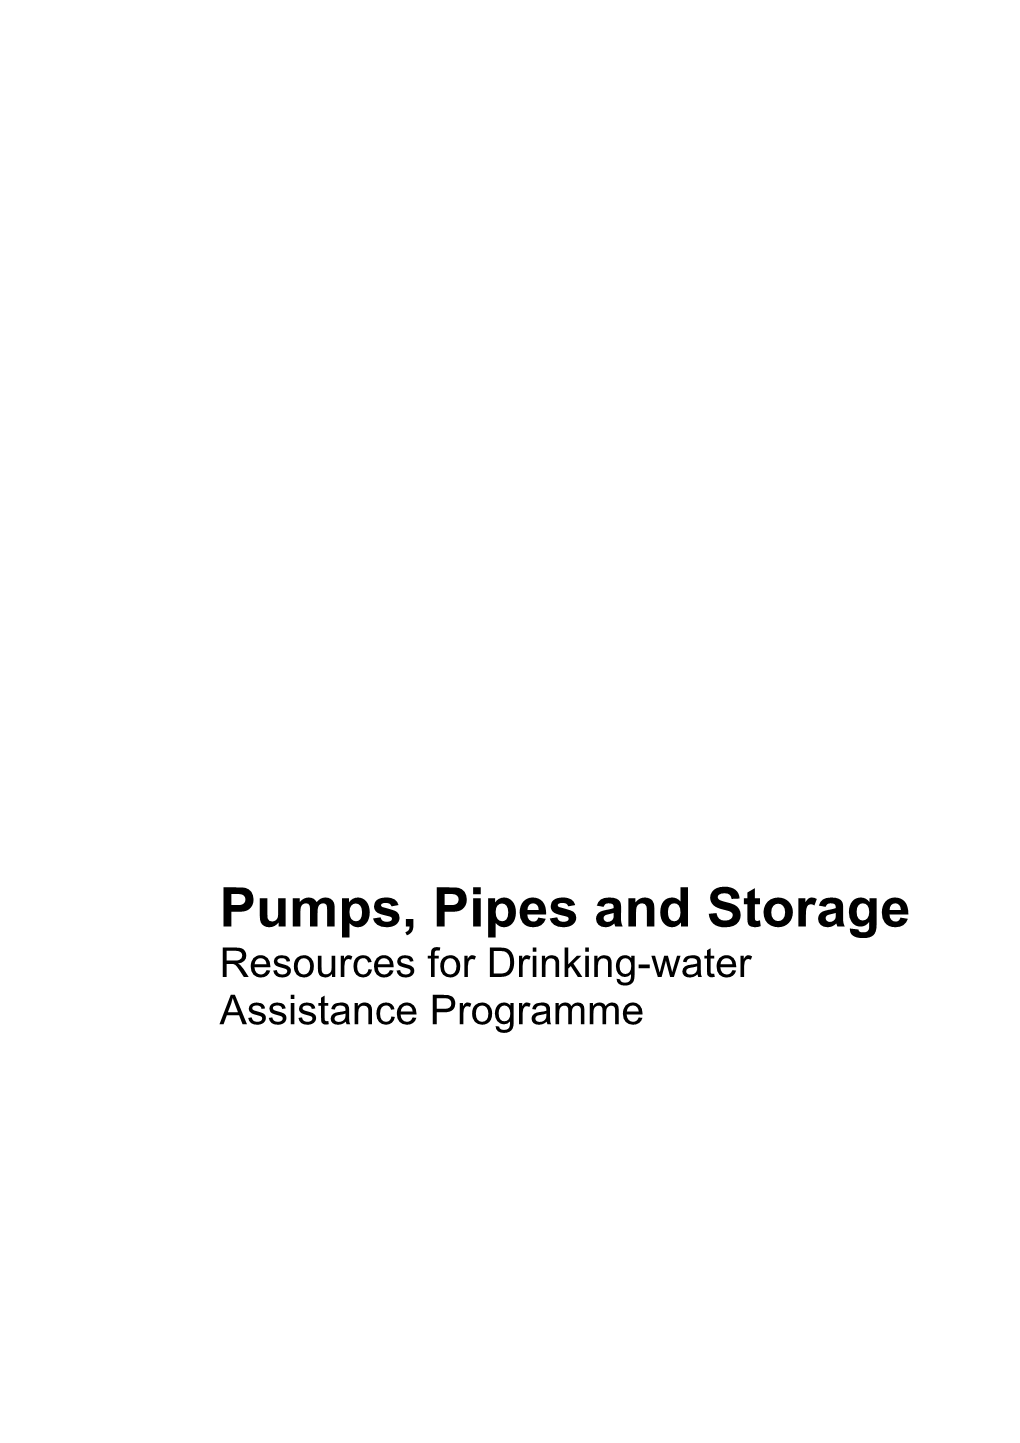 Pumps, Pipes and Storage